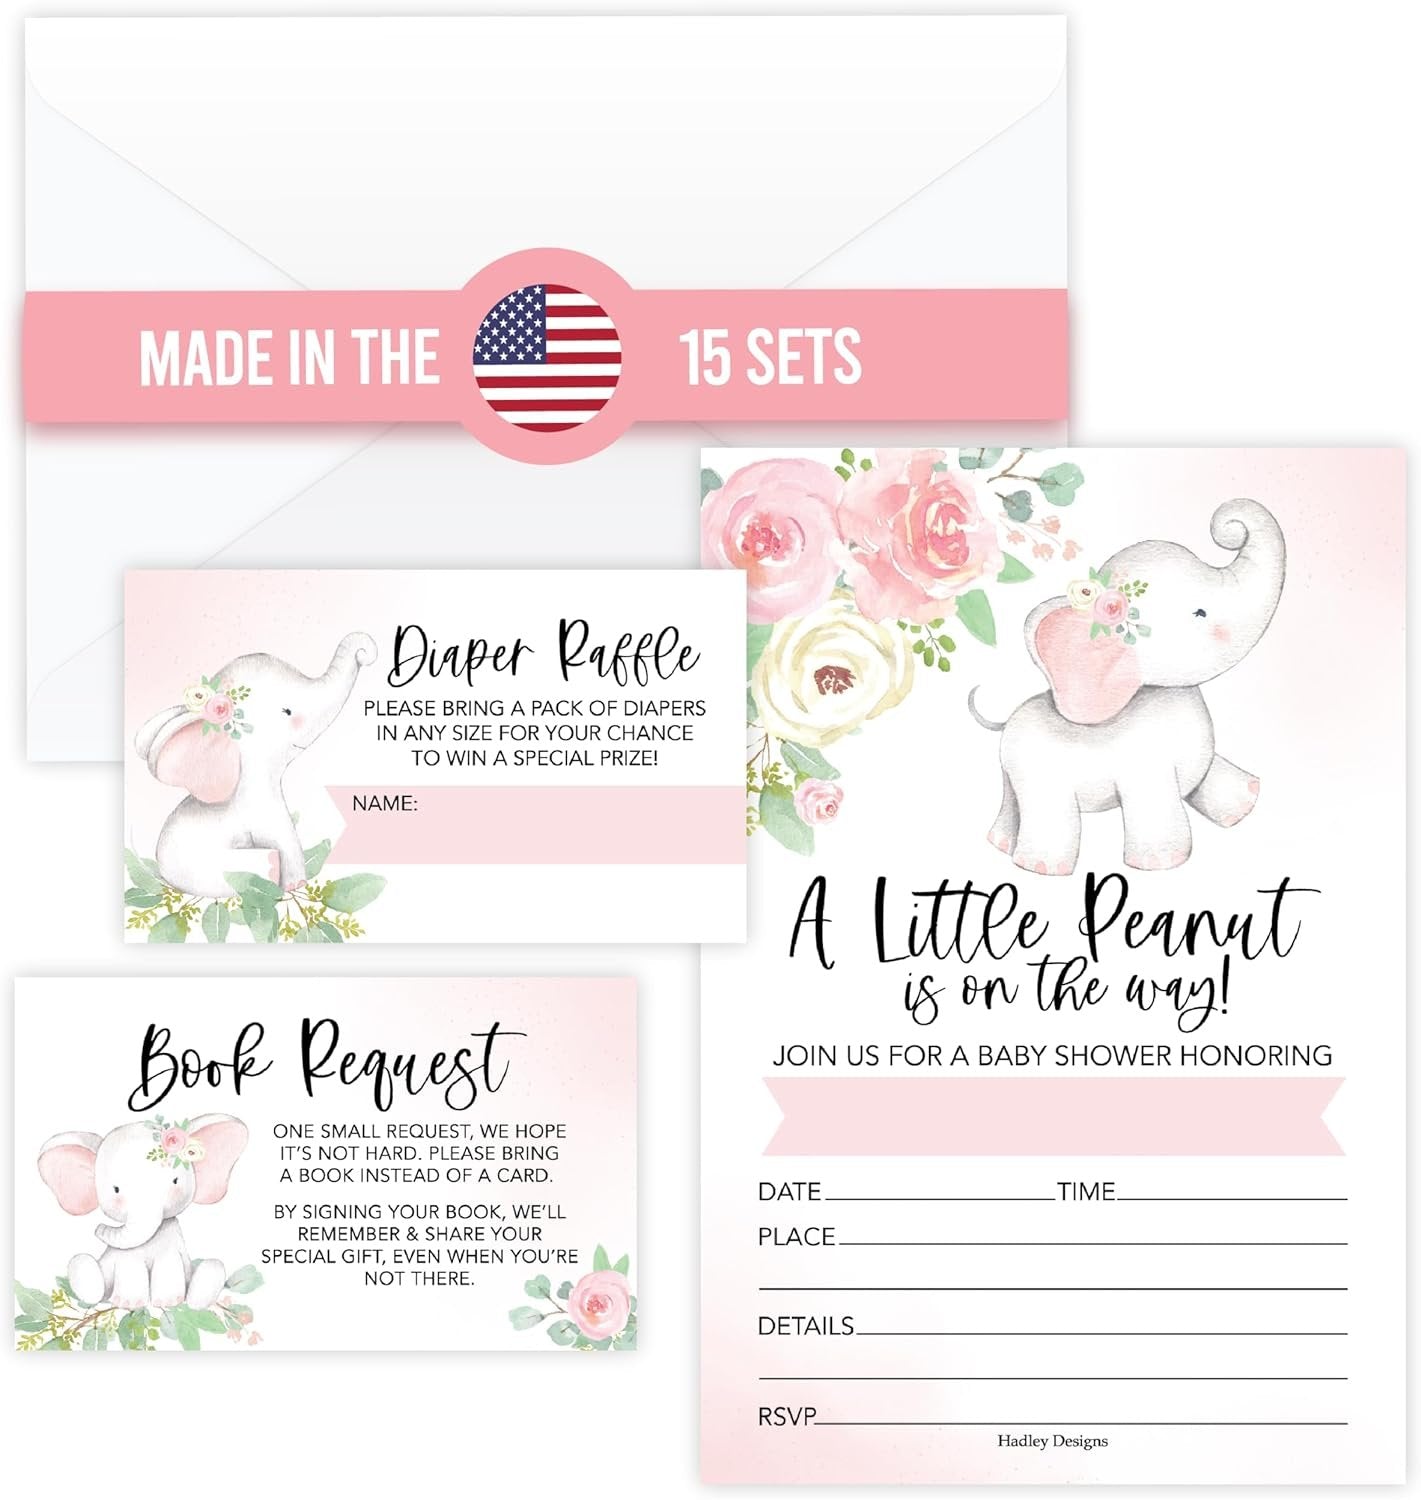 Baby Shower Invitations Shop by Theme | Elephant Girl